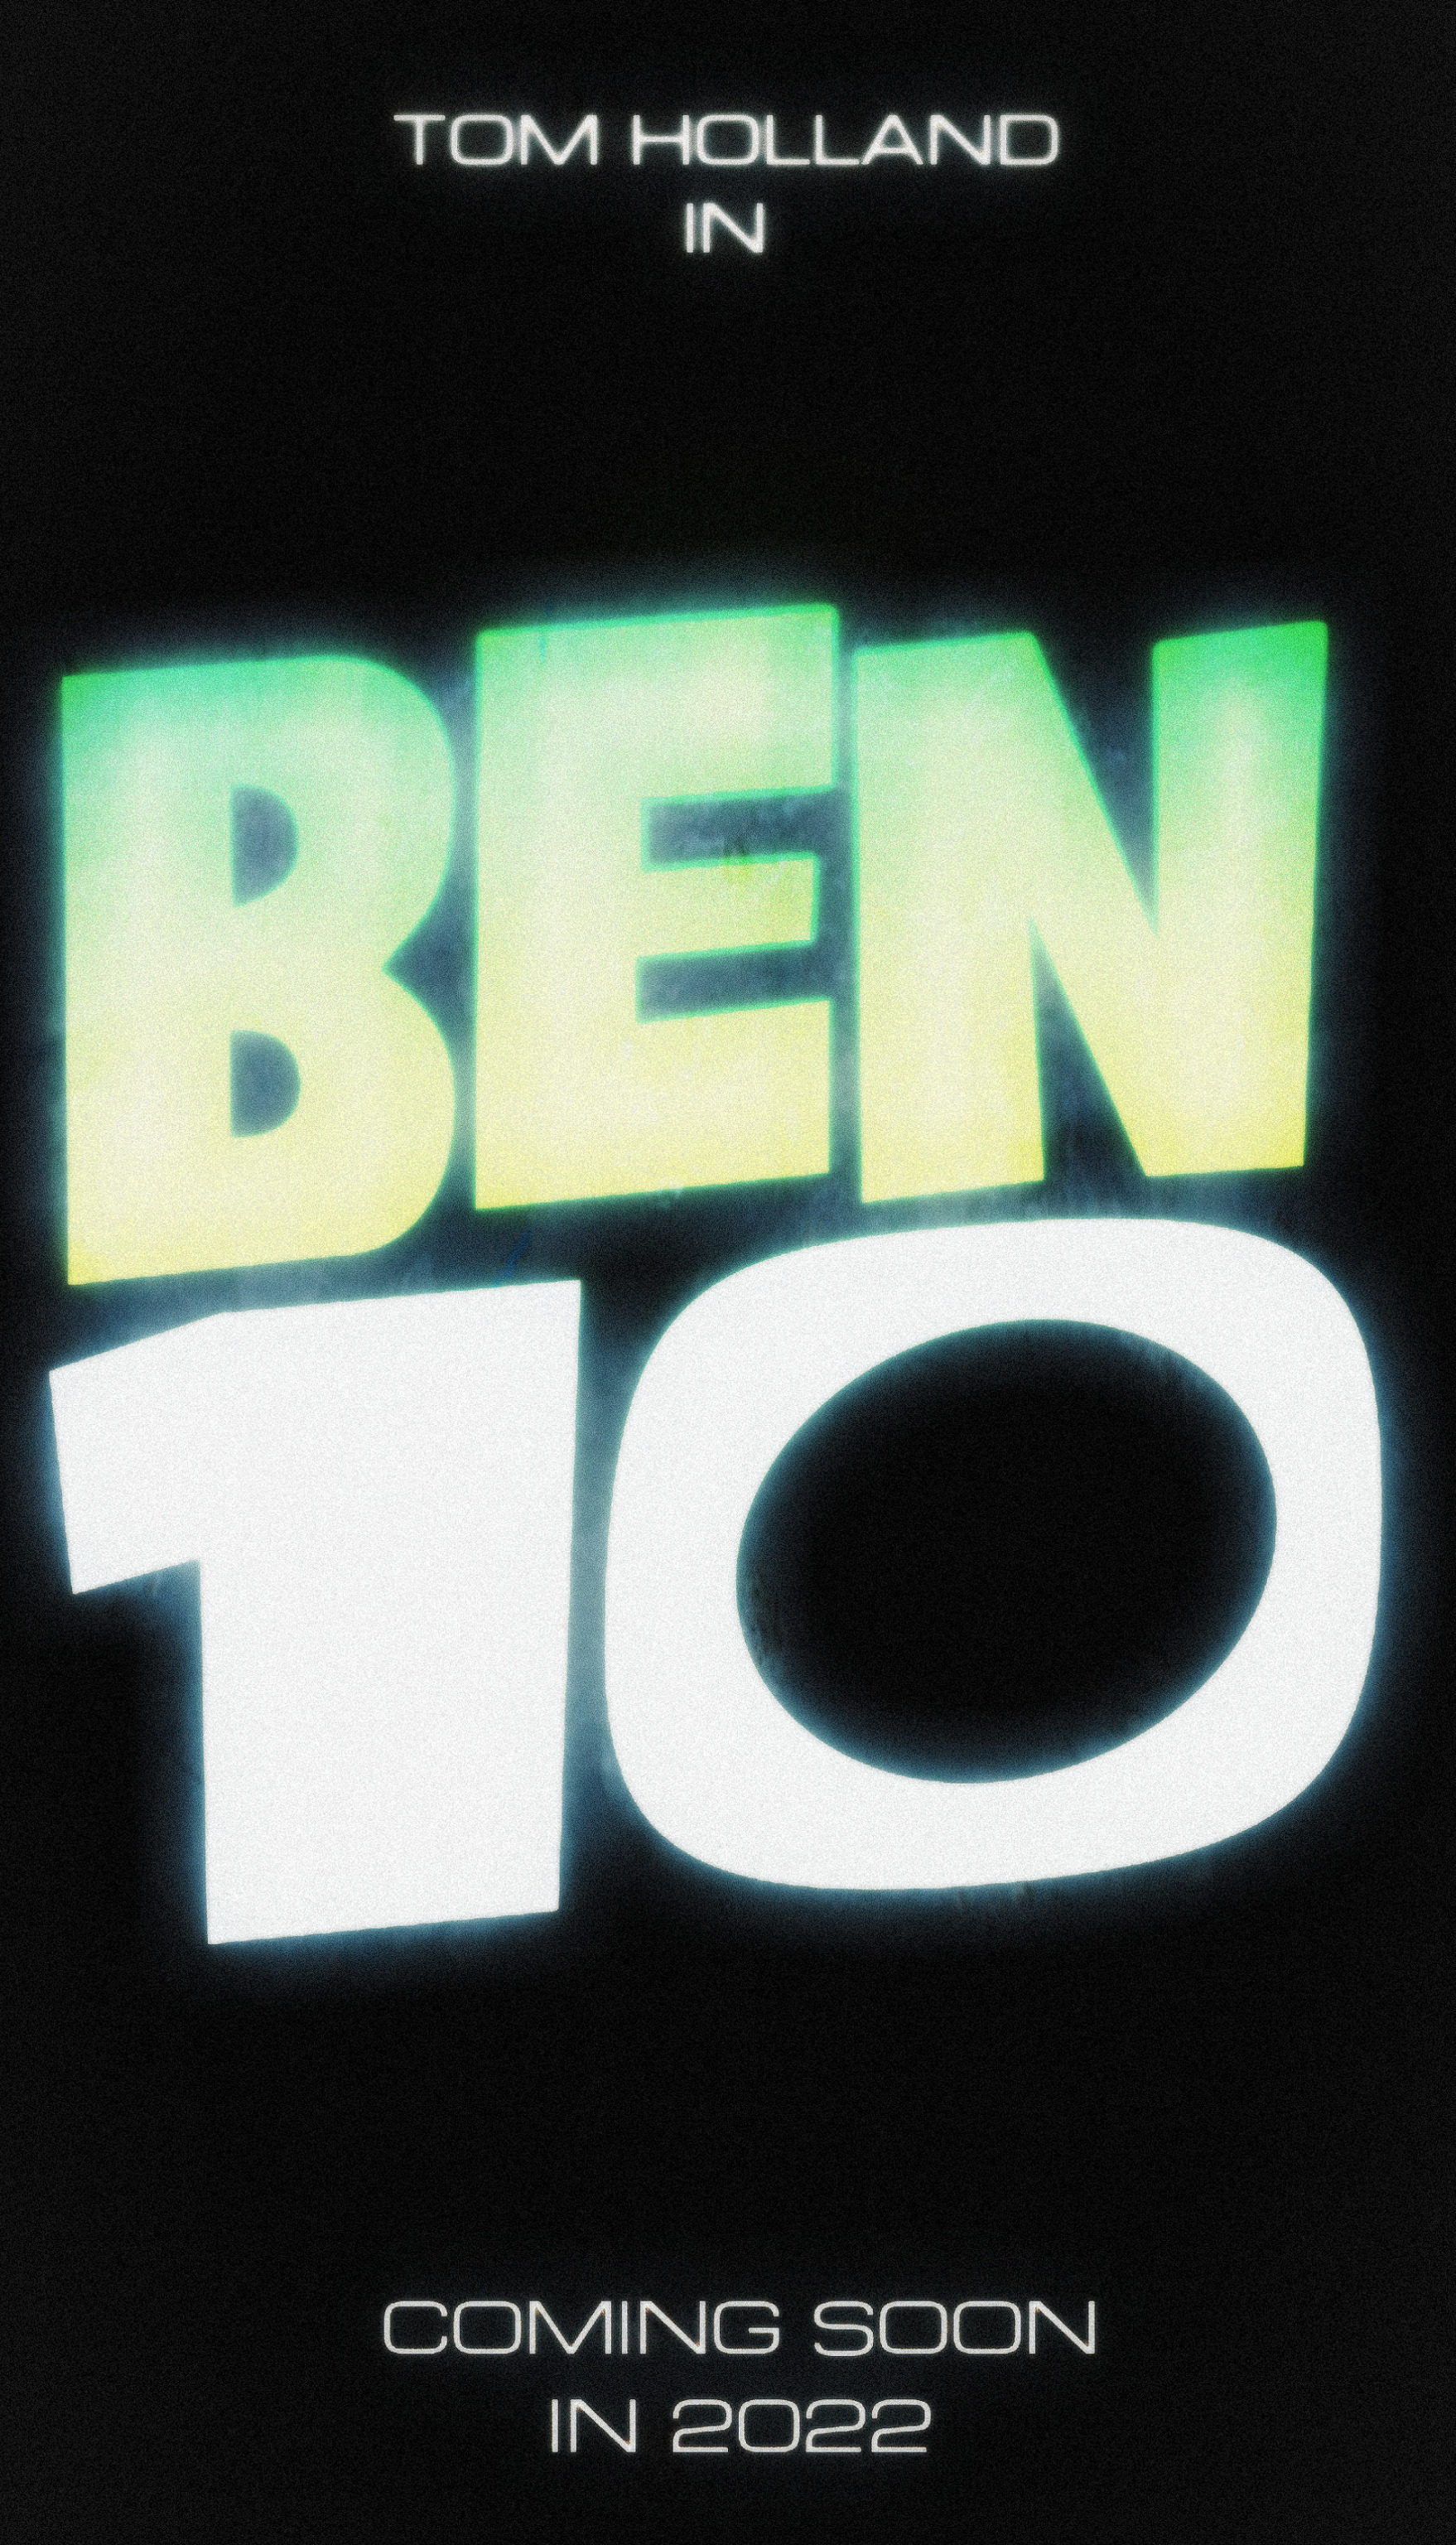 My Favourites Live Action Movie Poster Ever Seen In My Life With Netflix's Ben  10!!